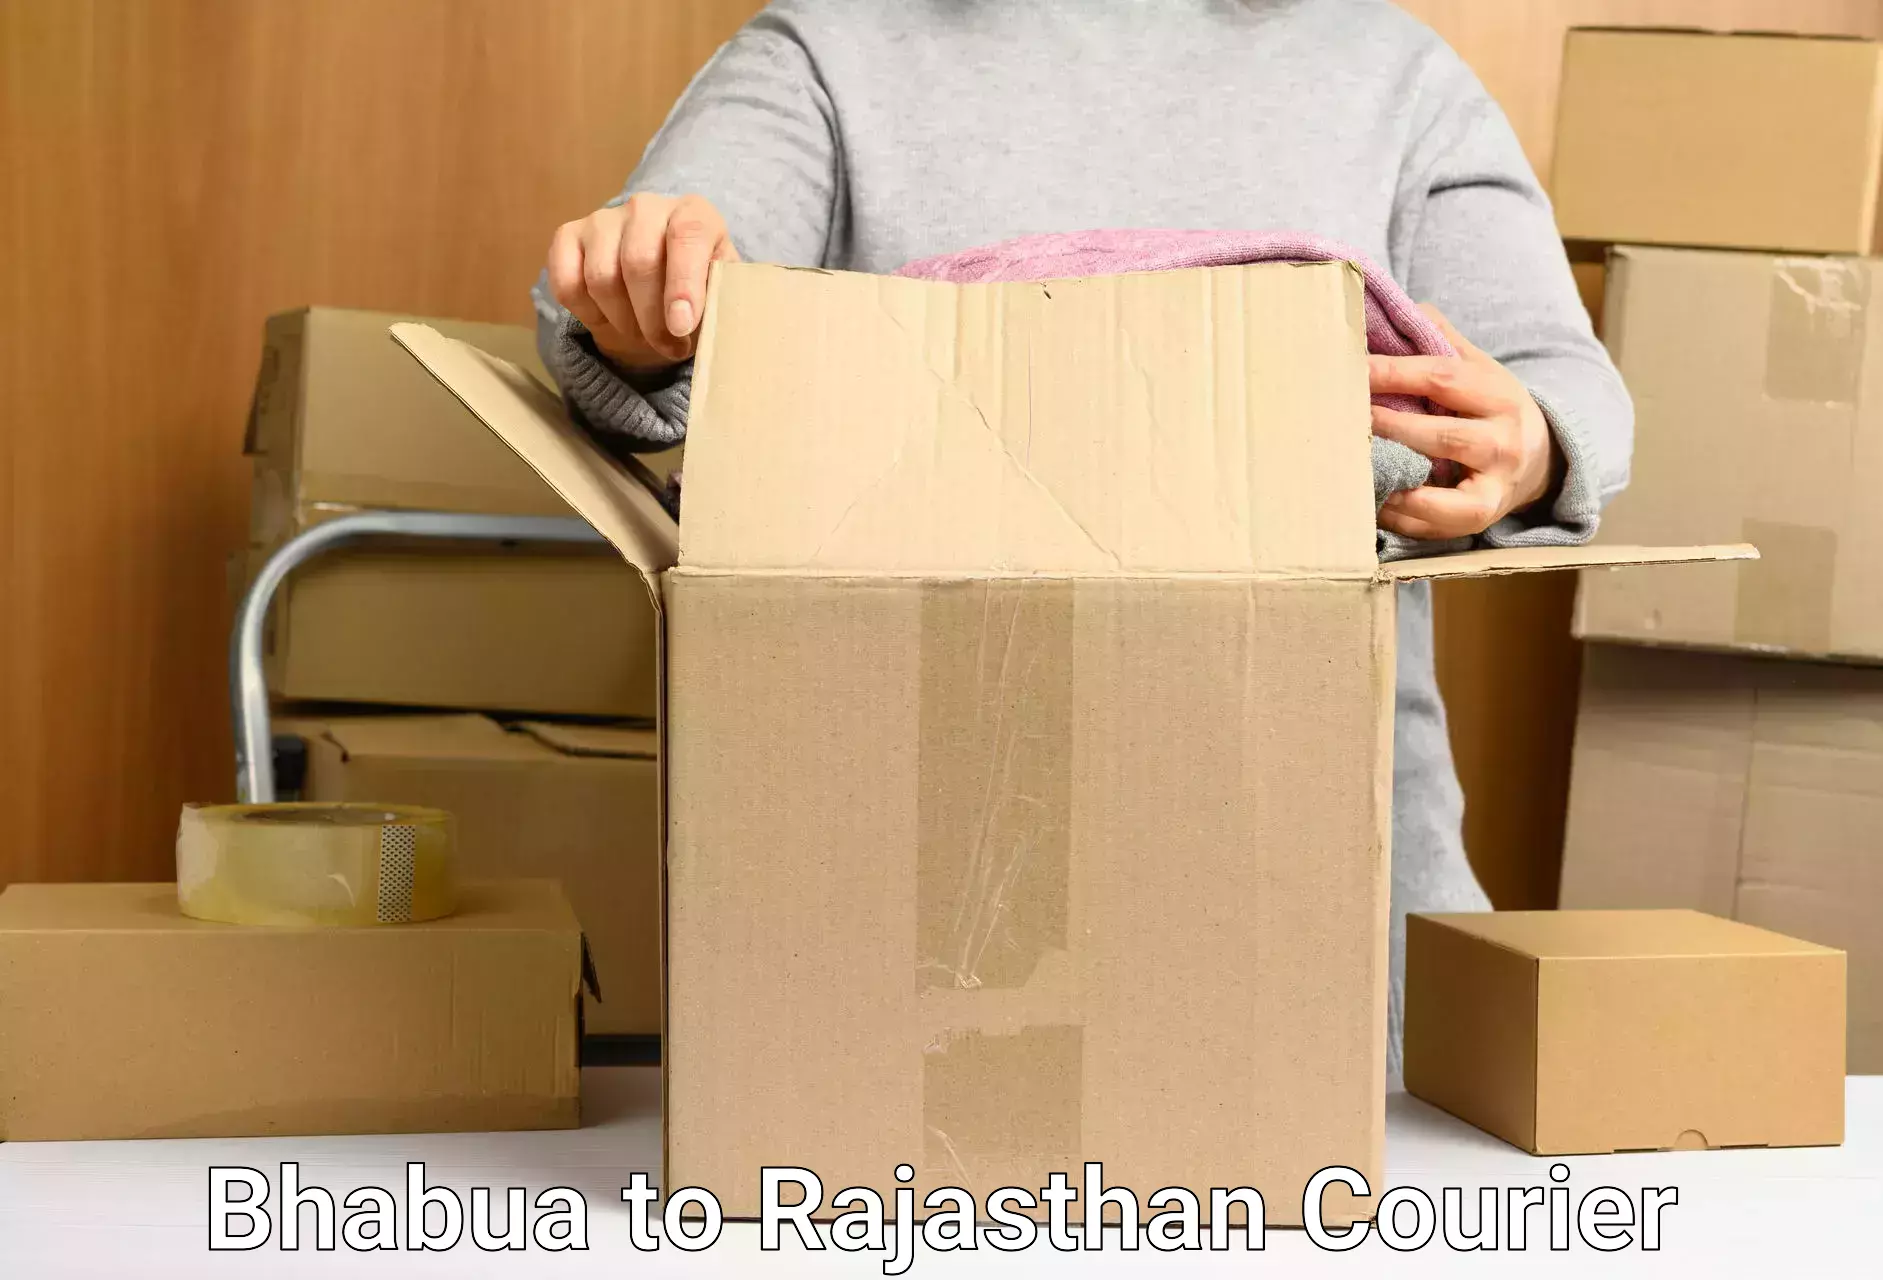 Next day courier Bhabua to Rajasthan